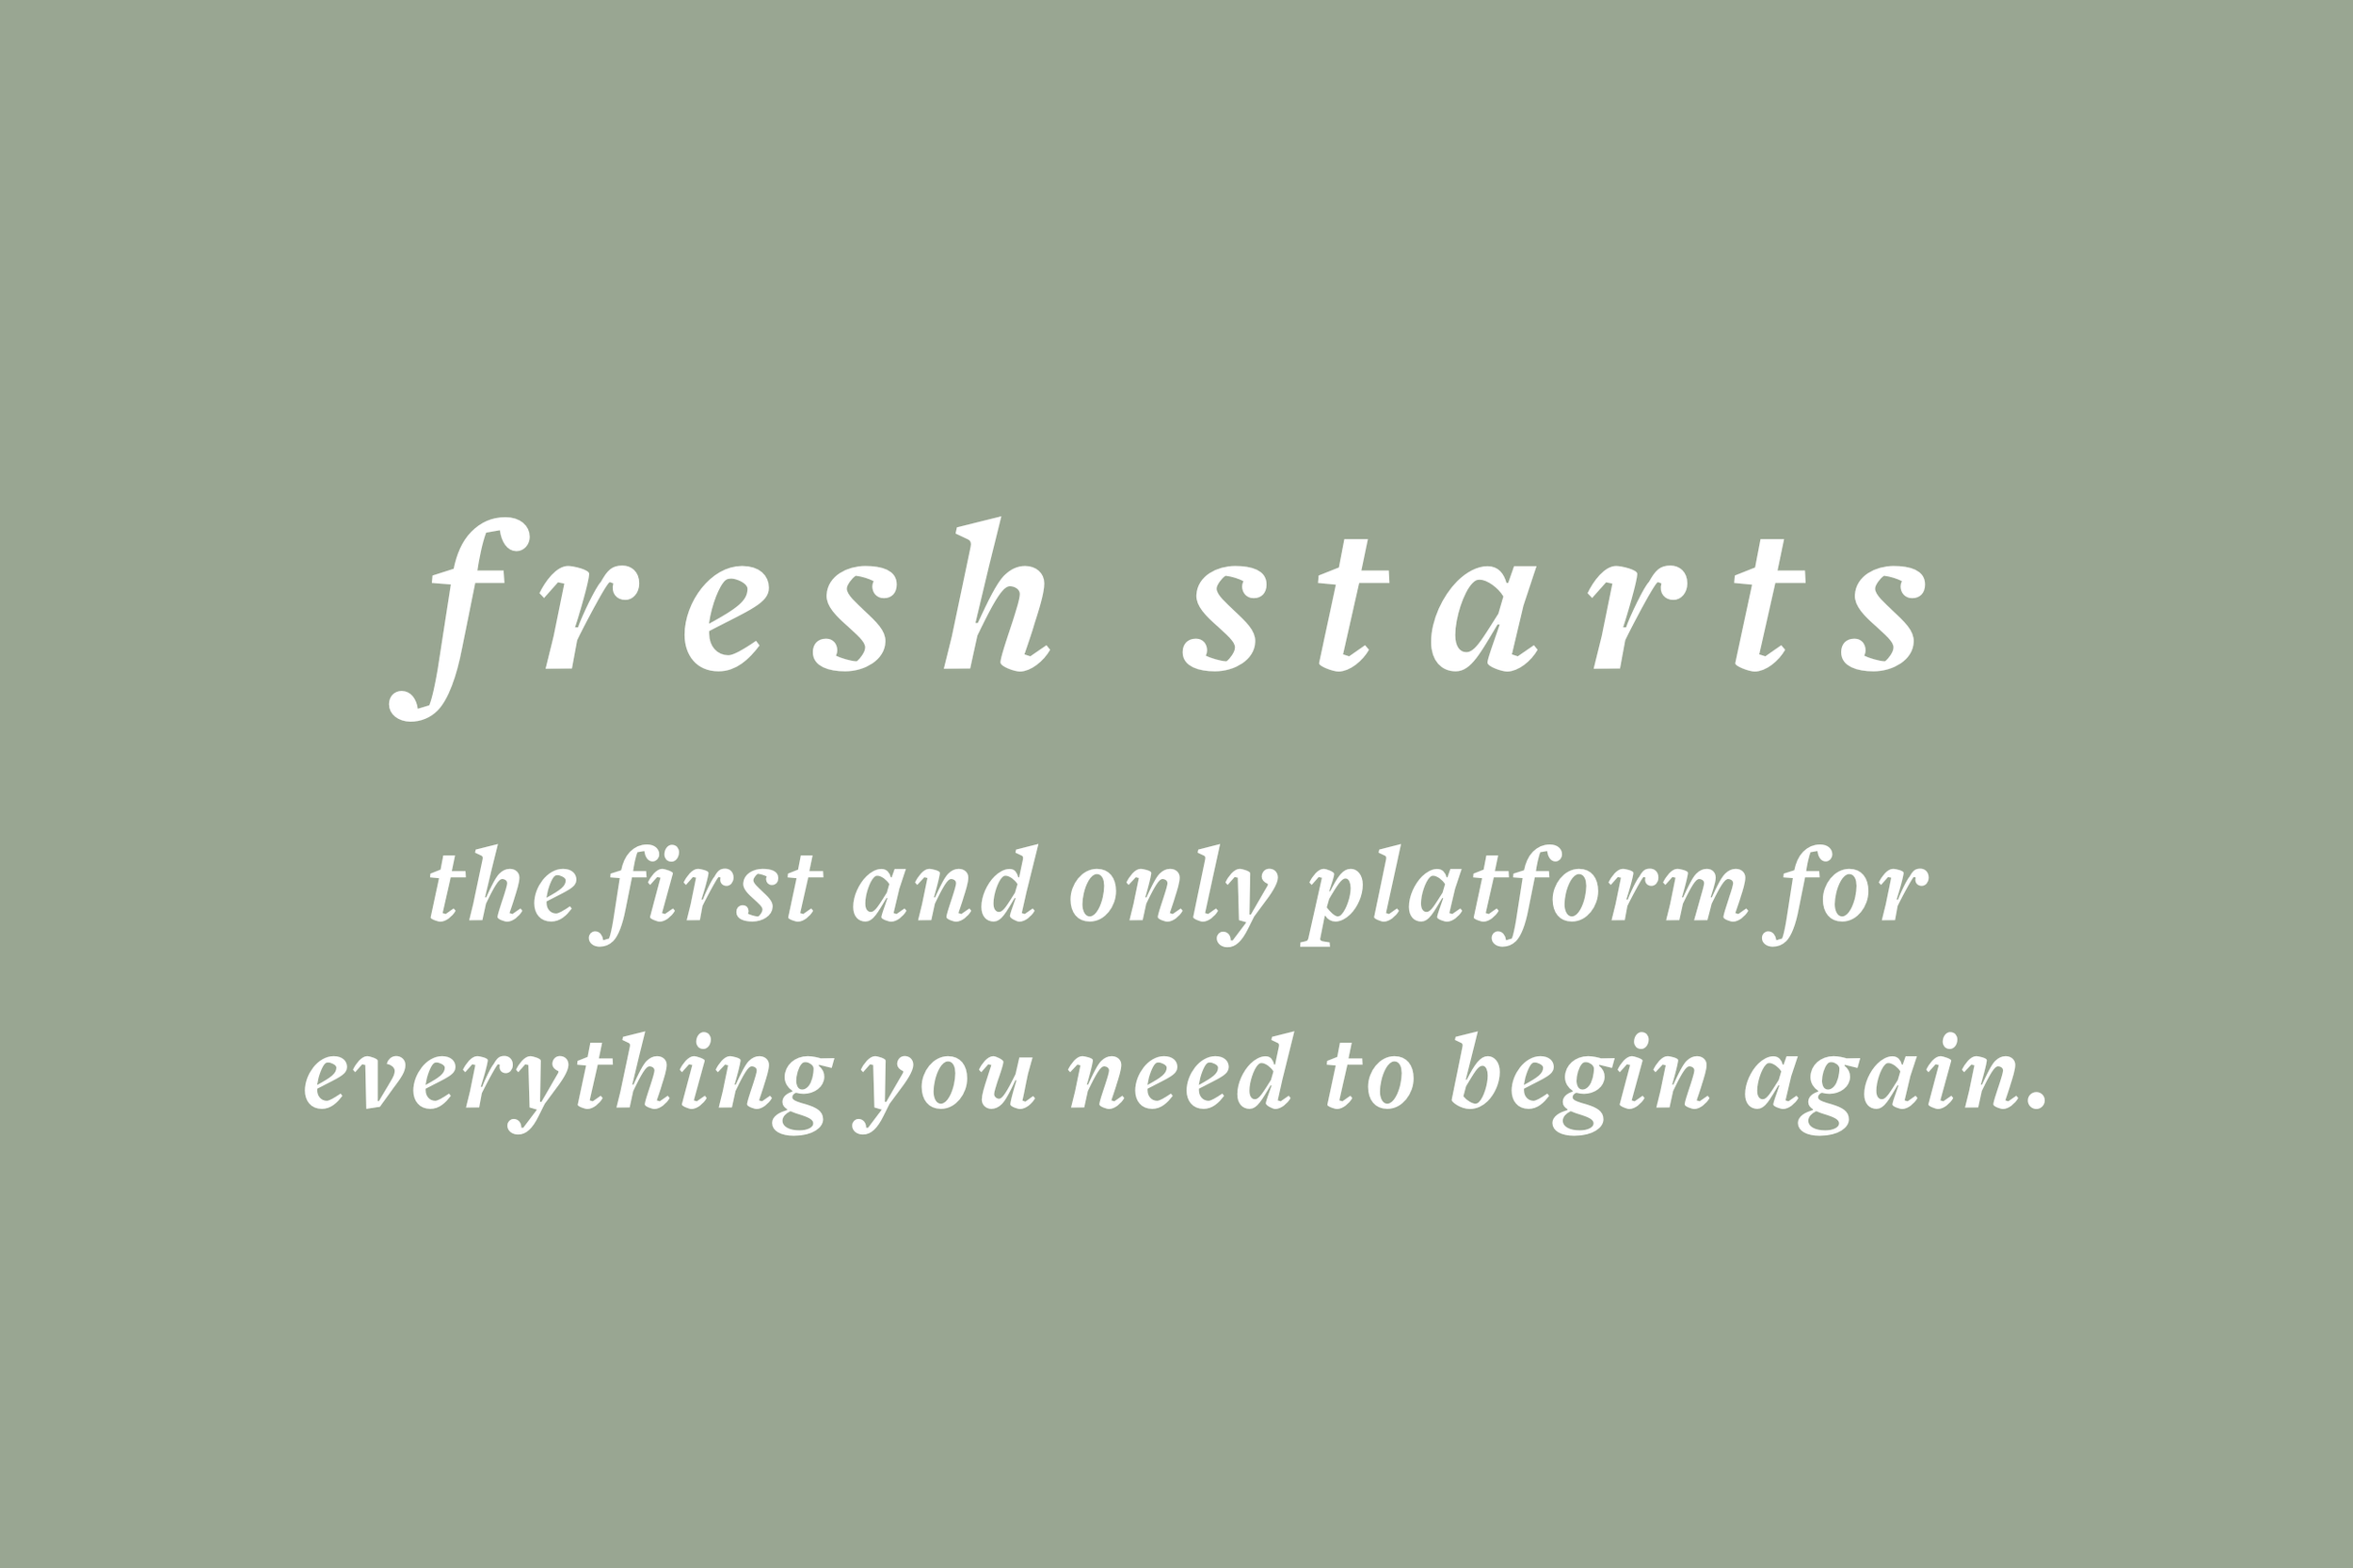 Fresh Starts Registry - the first and only platform for everything you need  to begin again